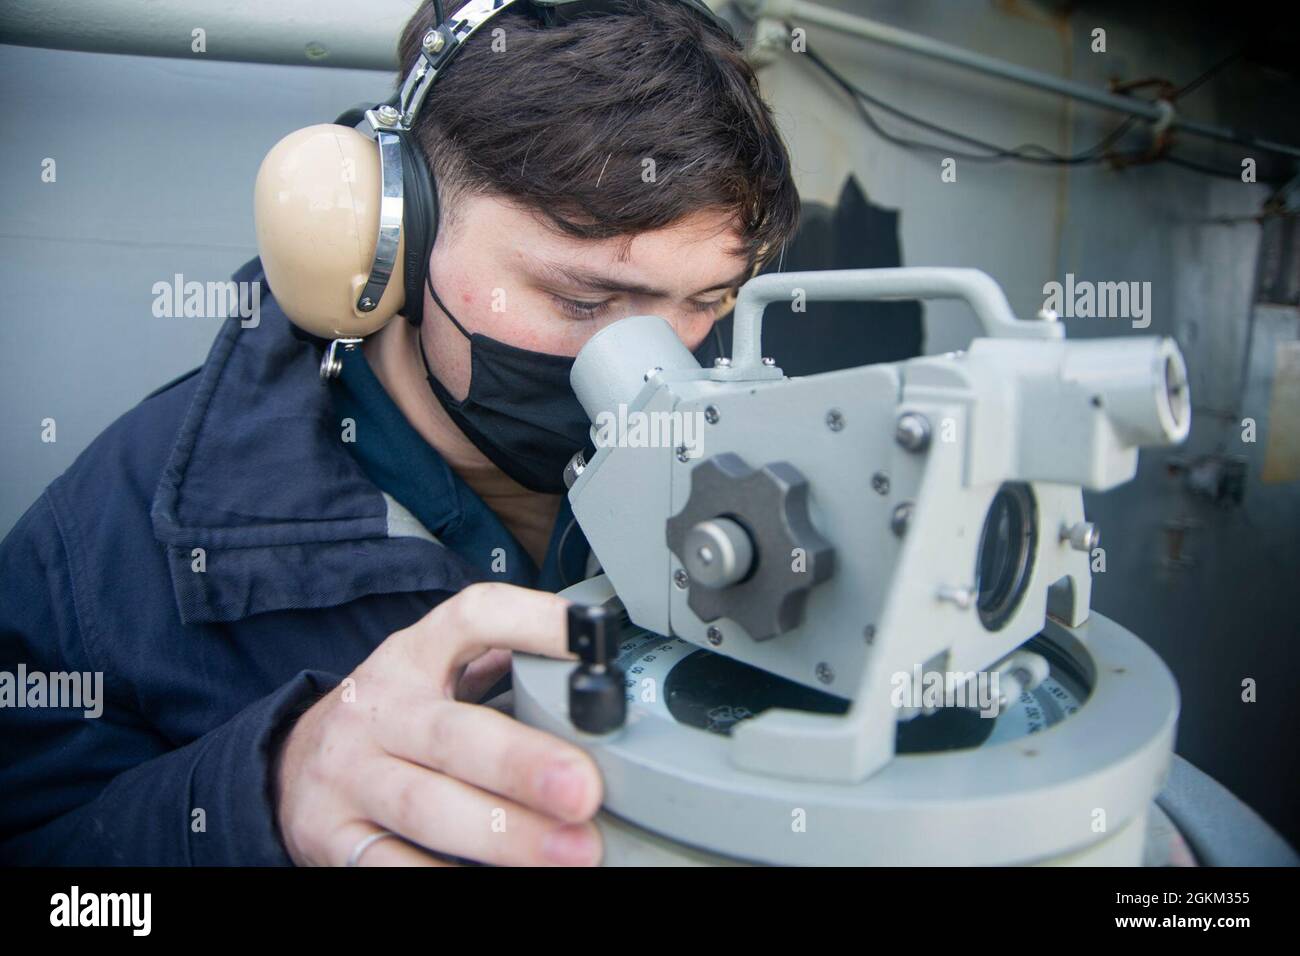 210521-N-ZE328-1020 NORFOLK, Va. (May 21, 2021) Quartermaster 3rd Class Jacob Renfrow, from Owensboro, Kentucky, uses a telescopic alidade on the signal bridge of the Nimitz-class aircraft carrier USS Harry S. Truman (CVN 75) during sea trials after completing an extended carrier incremental availability. Sea trials include a comprehensive test of the ship’s systems and technologies in order to ensure the ship is ready to resume operations. Stock Photo